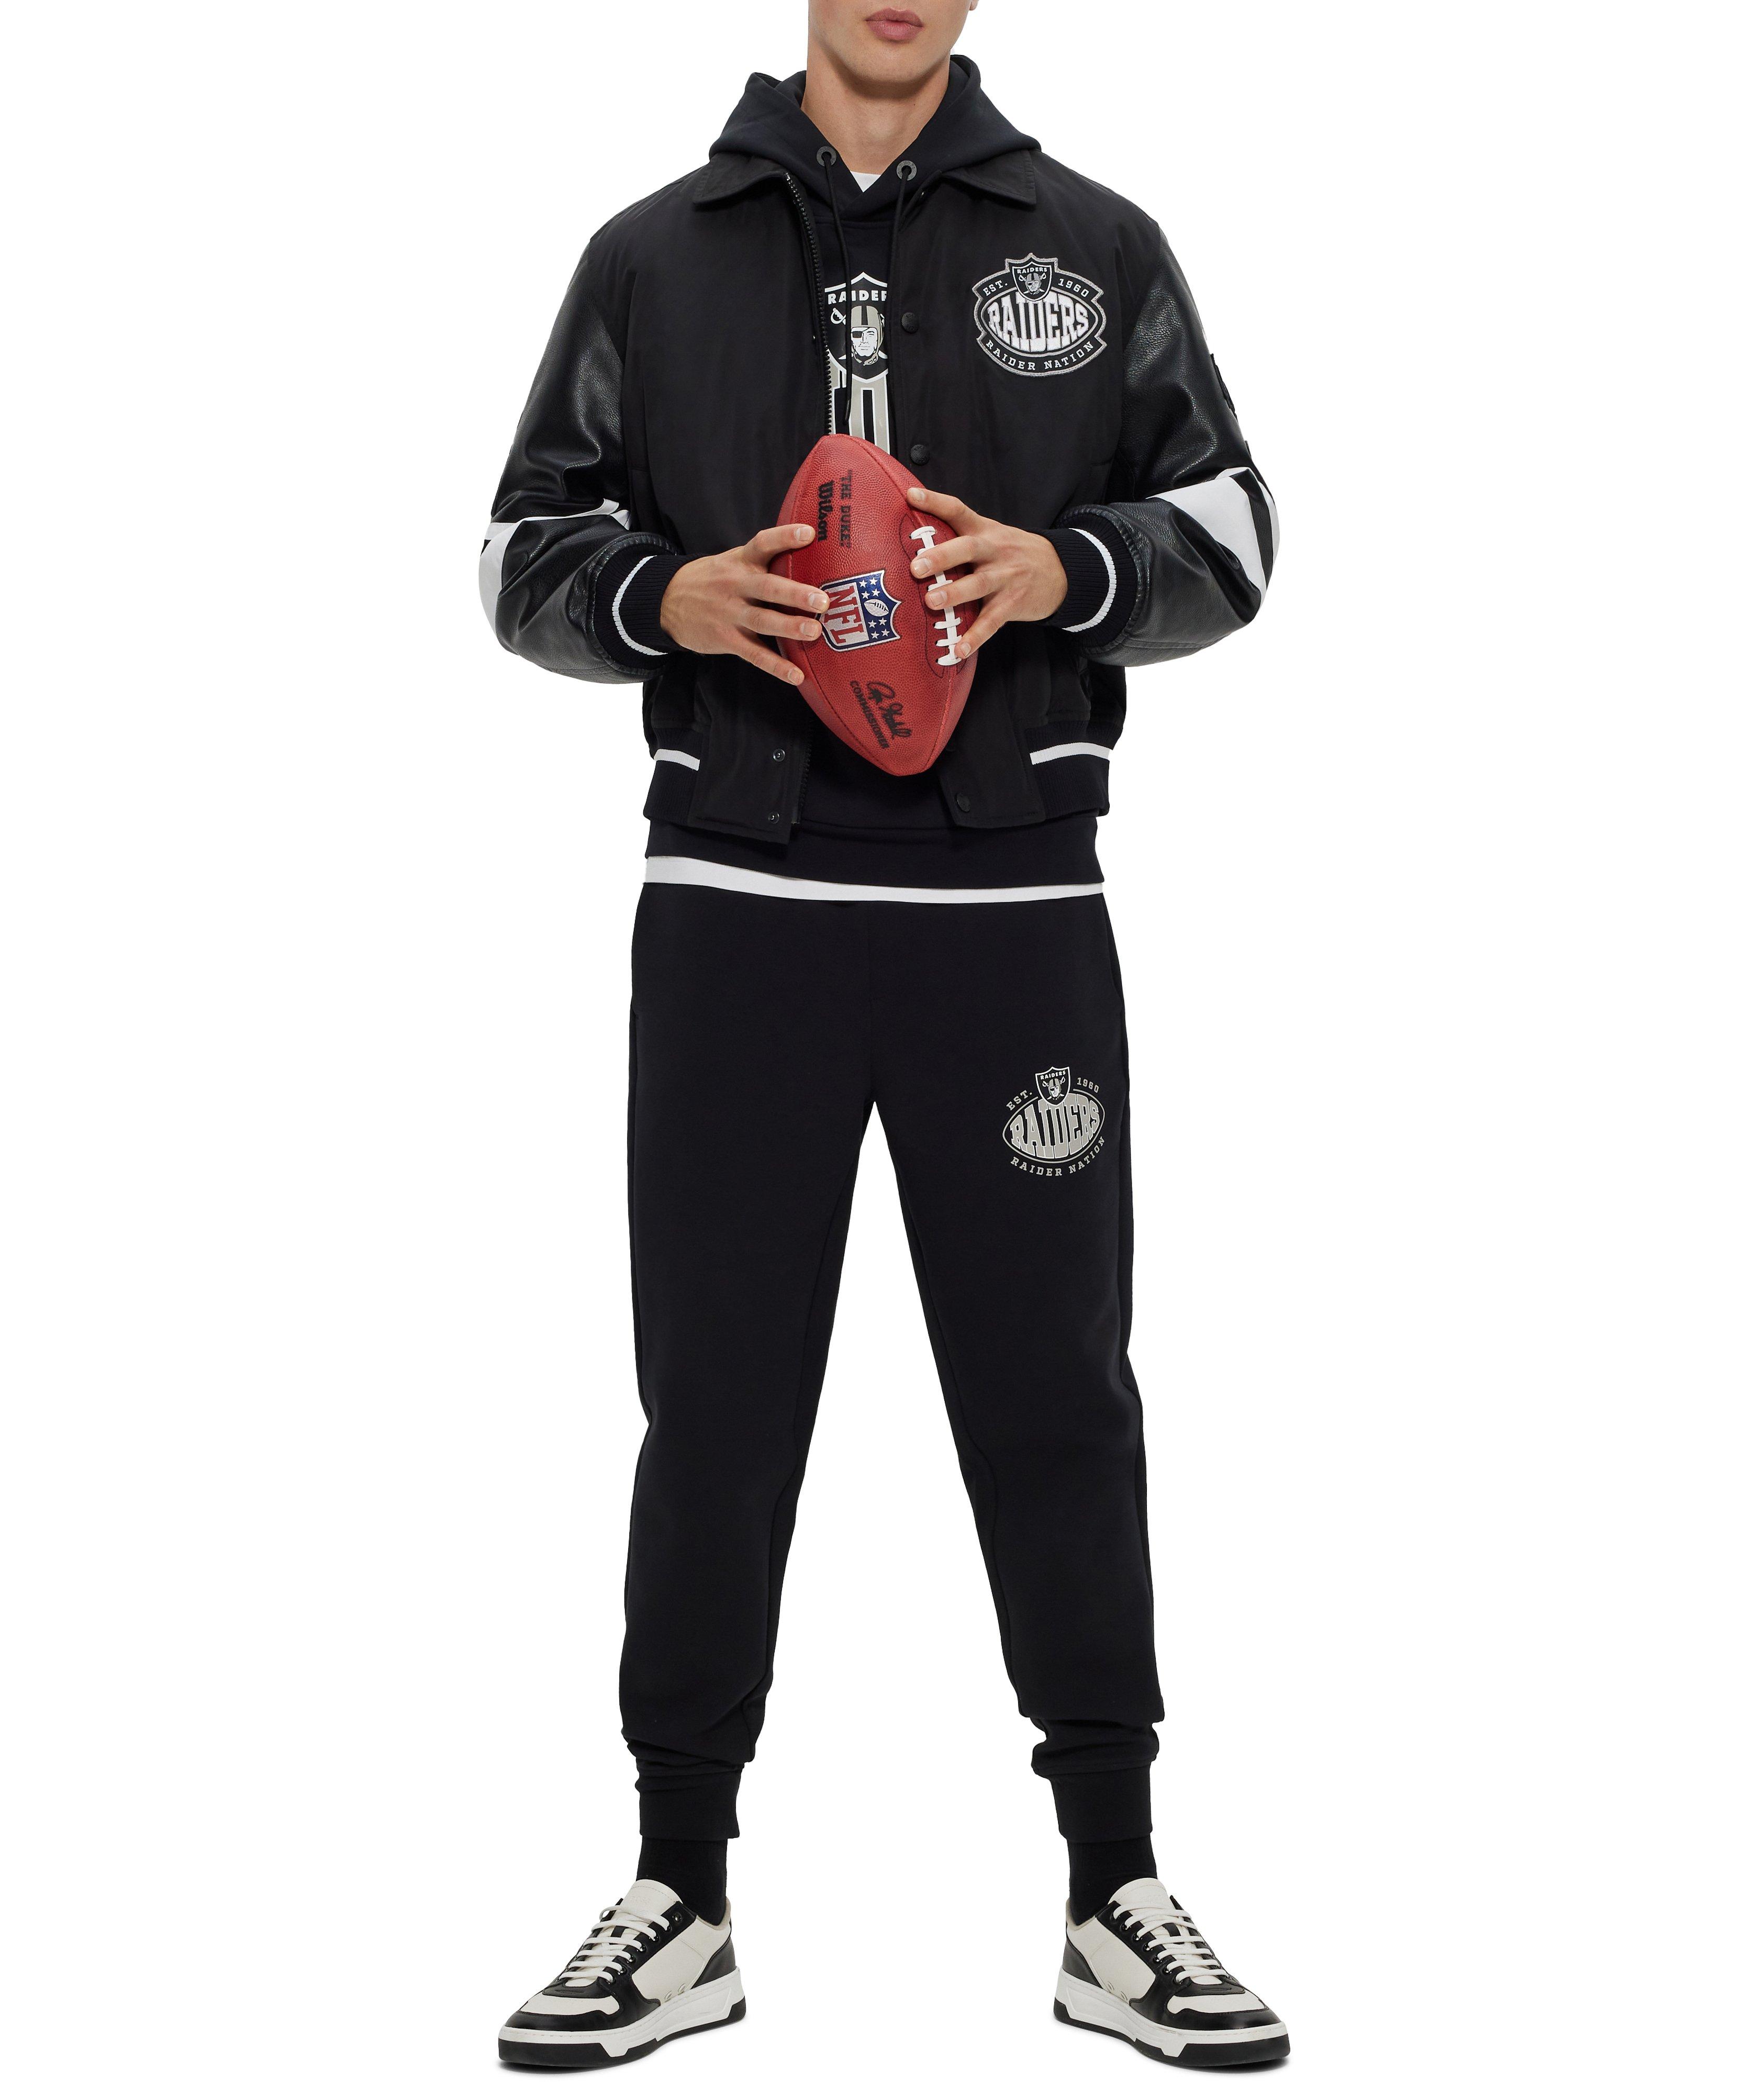 NFL Collection Las Vegas Raiders Hooded Sweater image 4